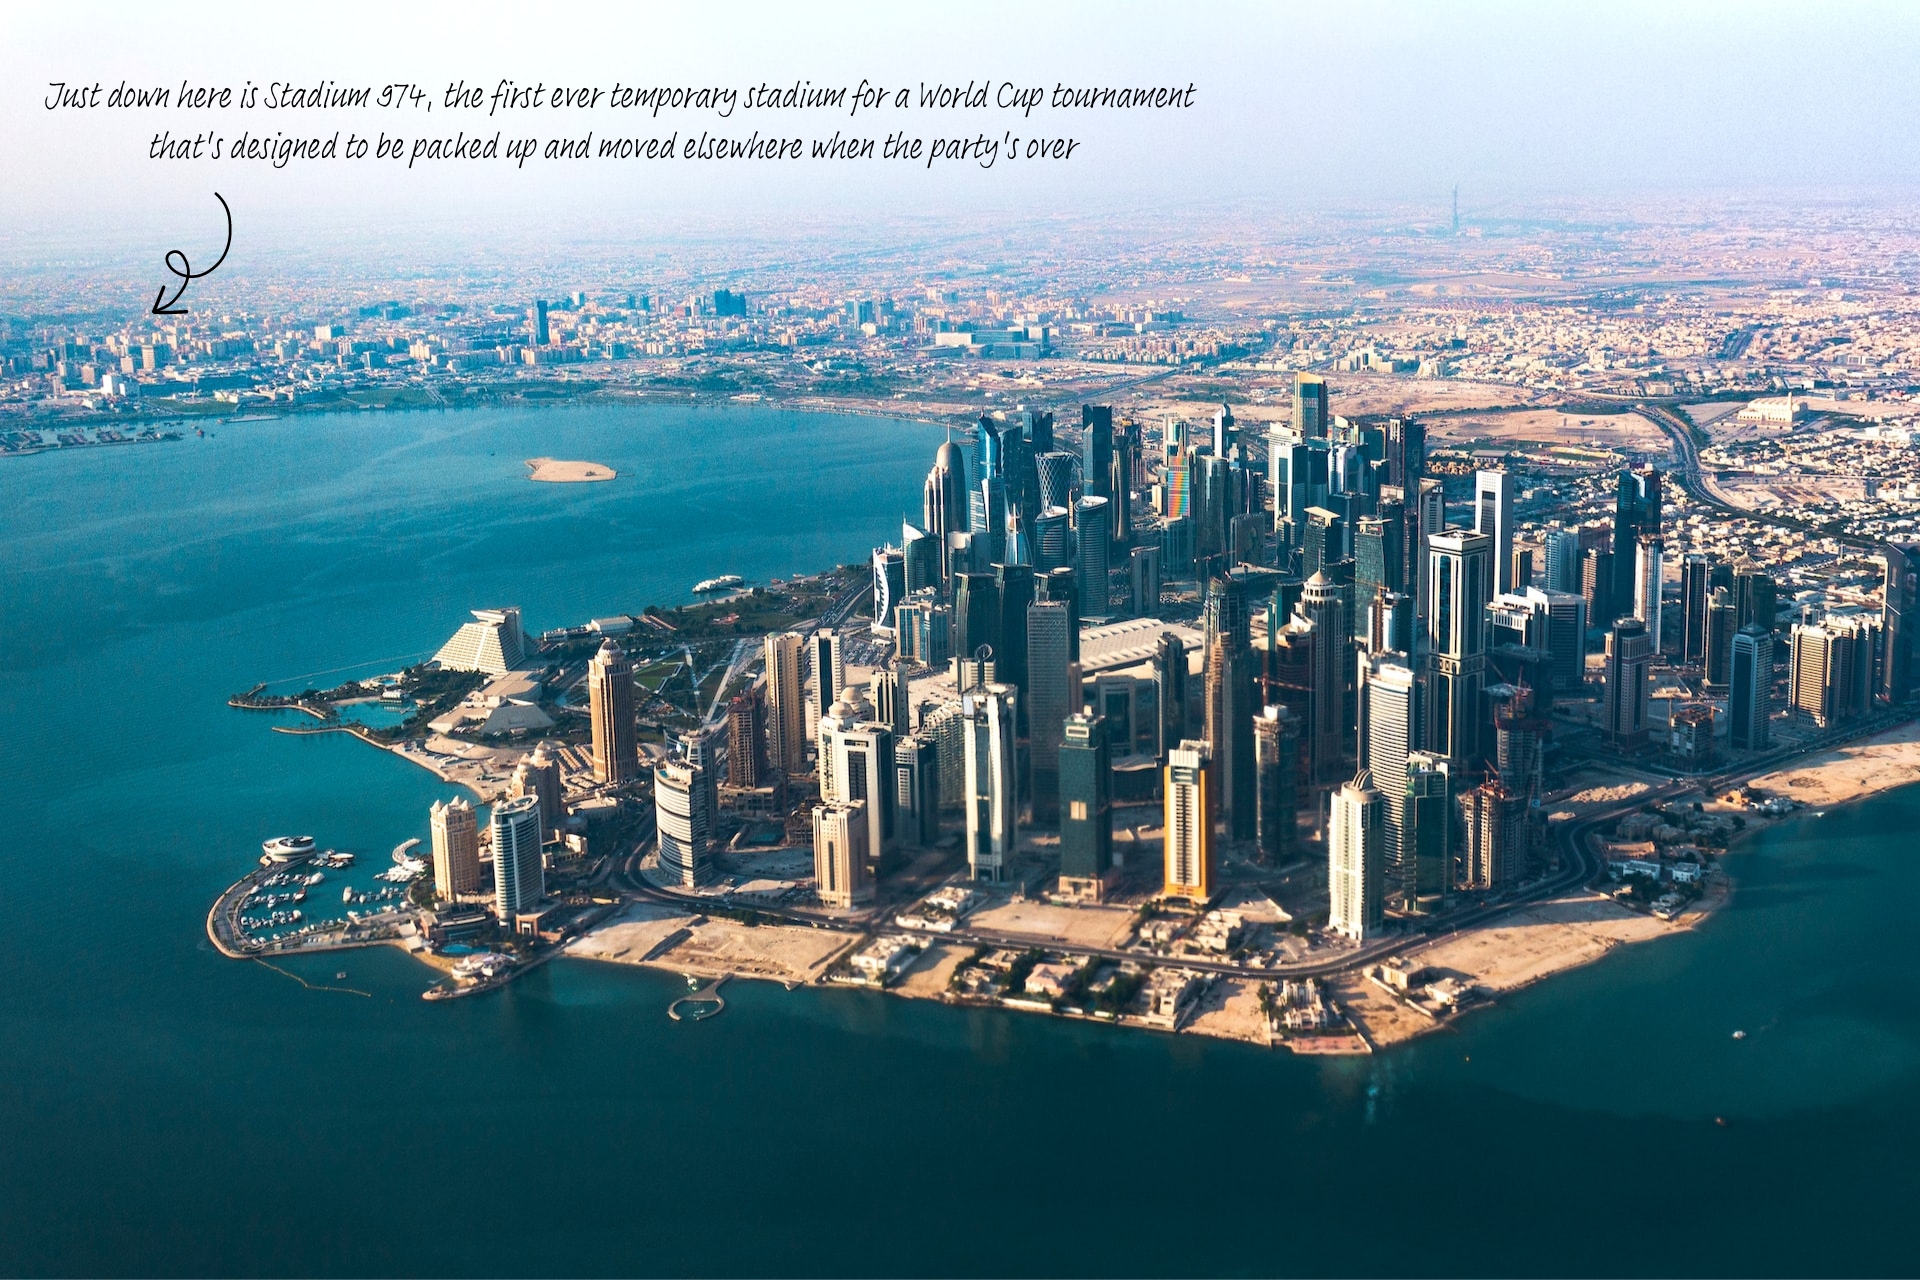 An image of the Doha skyline in Qatar. A scribble note points out that Stadium 974 is just at the bottom left of the picture.